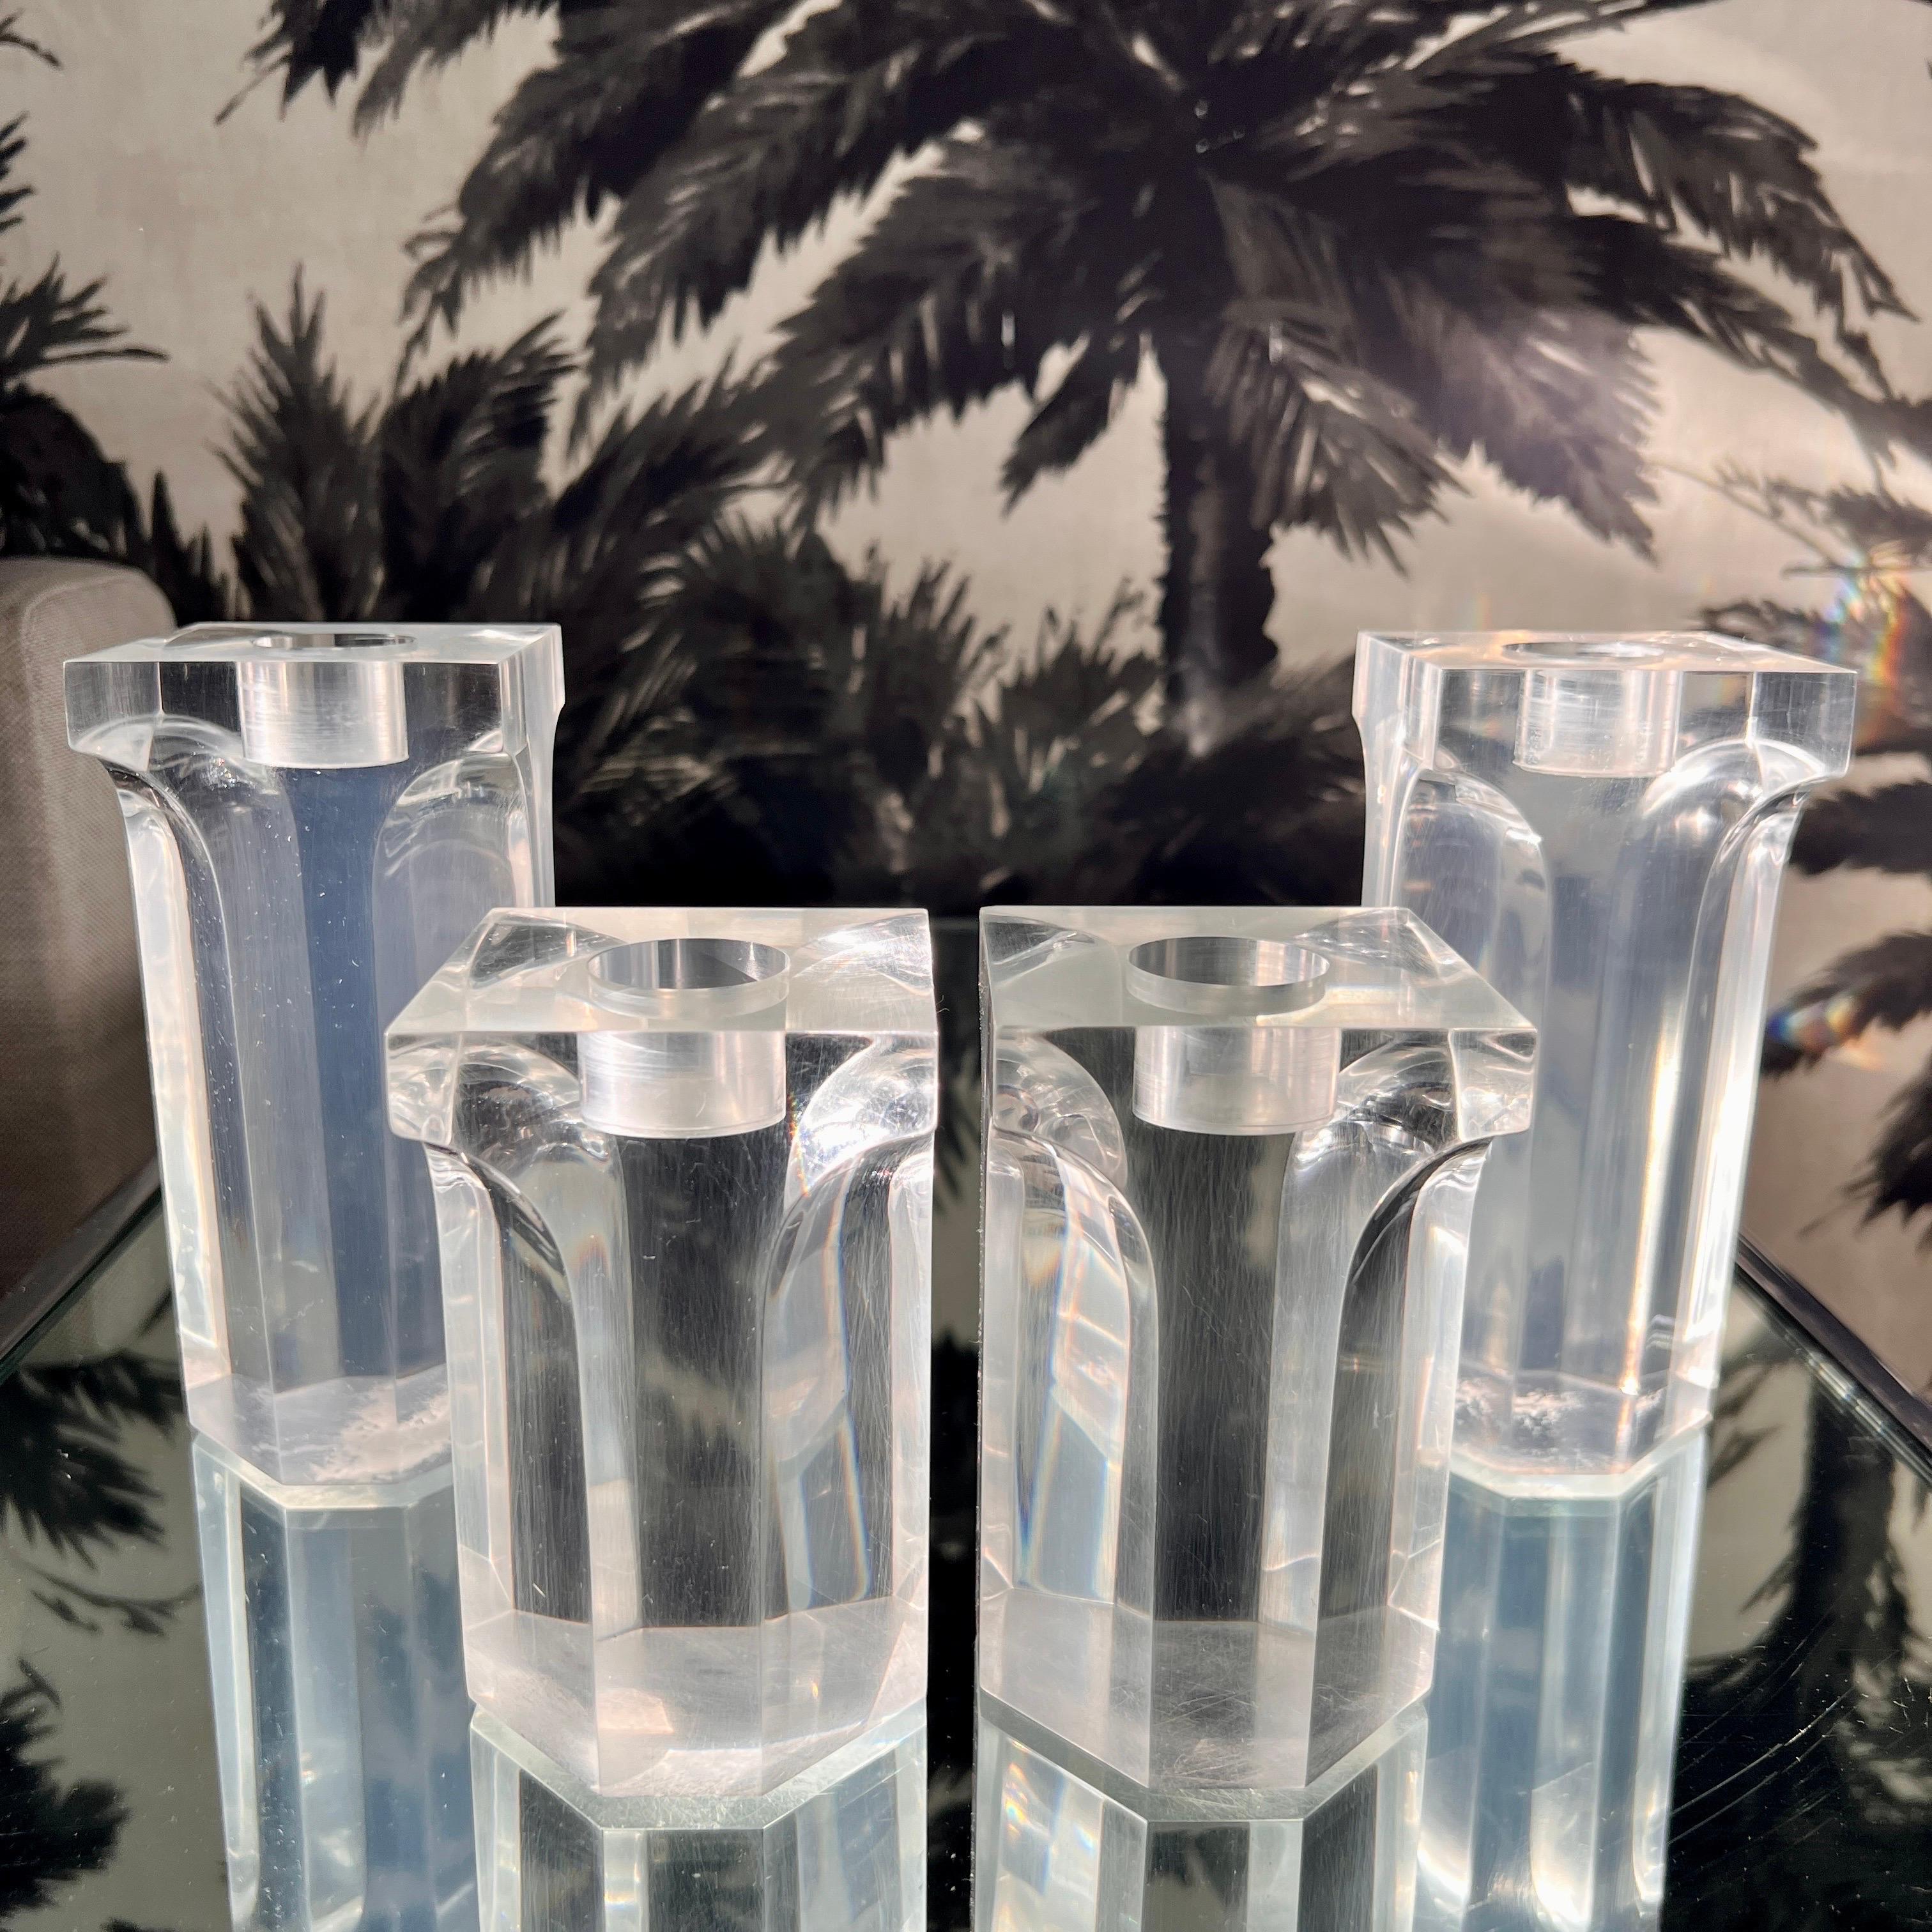 Mid-Century Modern candleholders in the style of Charles Hollis Jones with architectural Corinthian column design. Handcrafted of solid lucite with polished edges and beveled details. The set includes two taller candle holders at 6.25